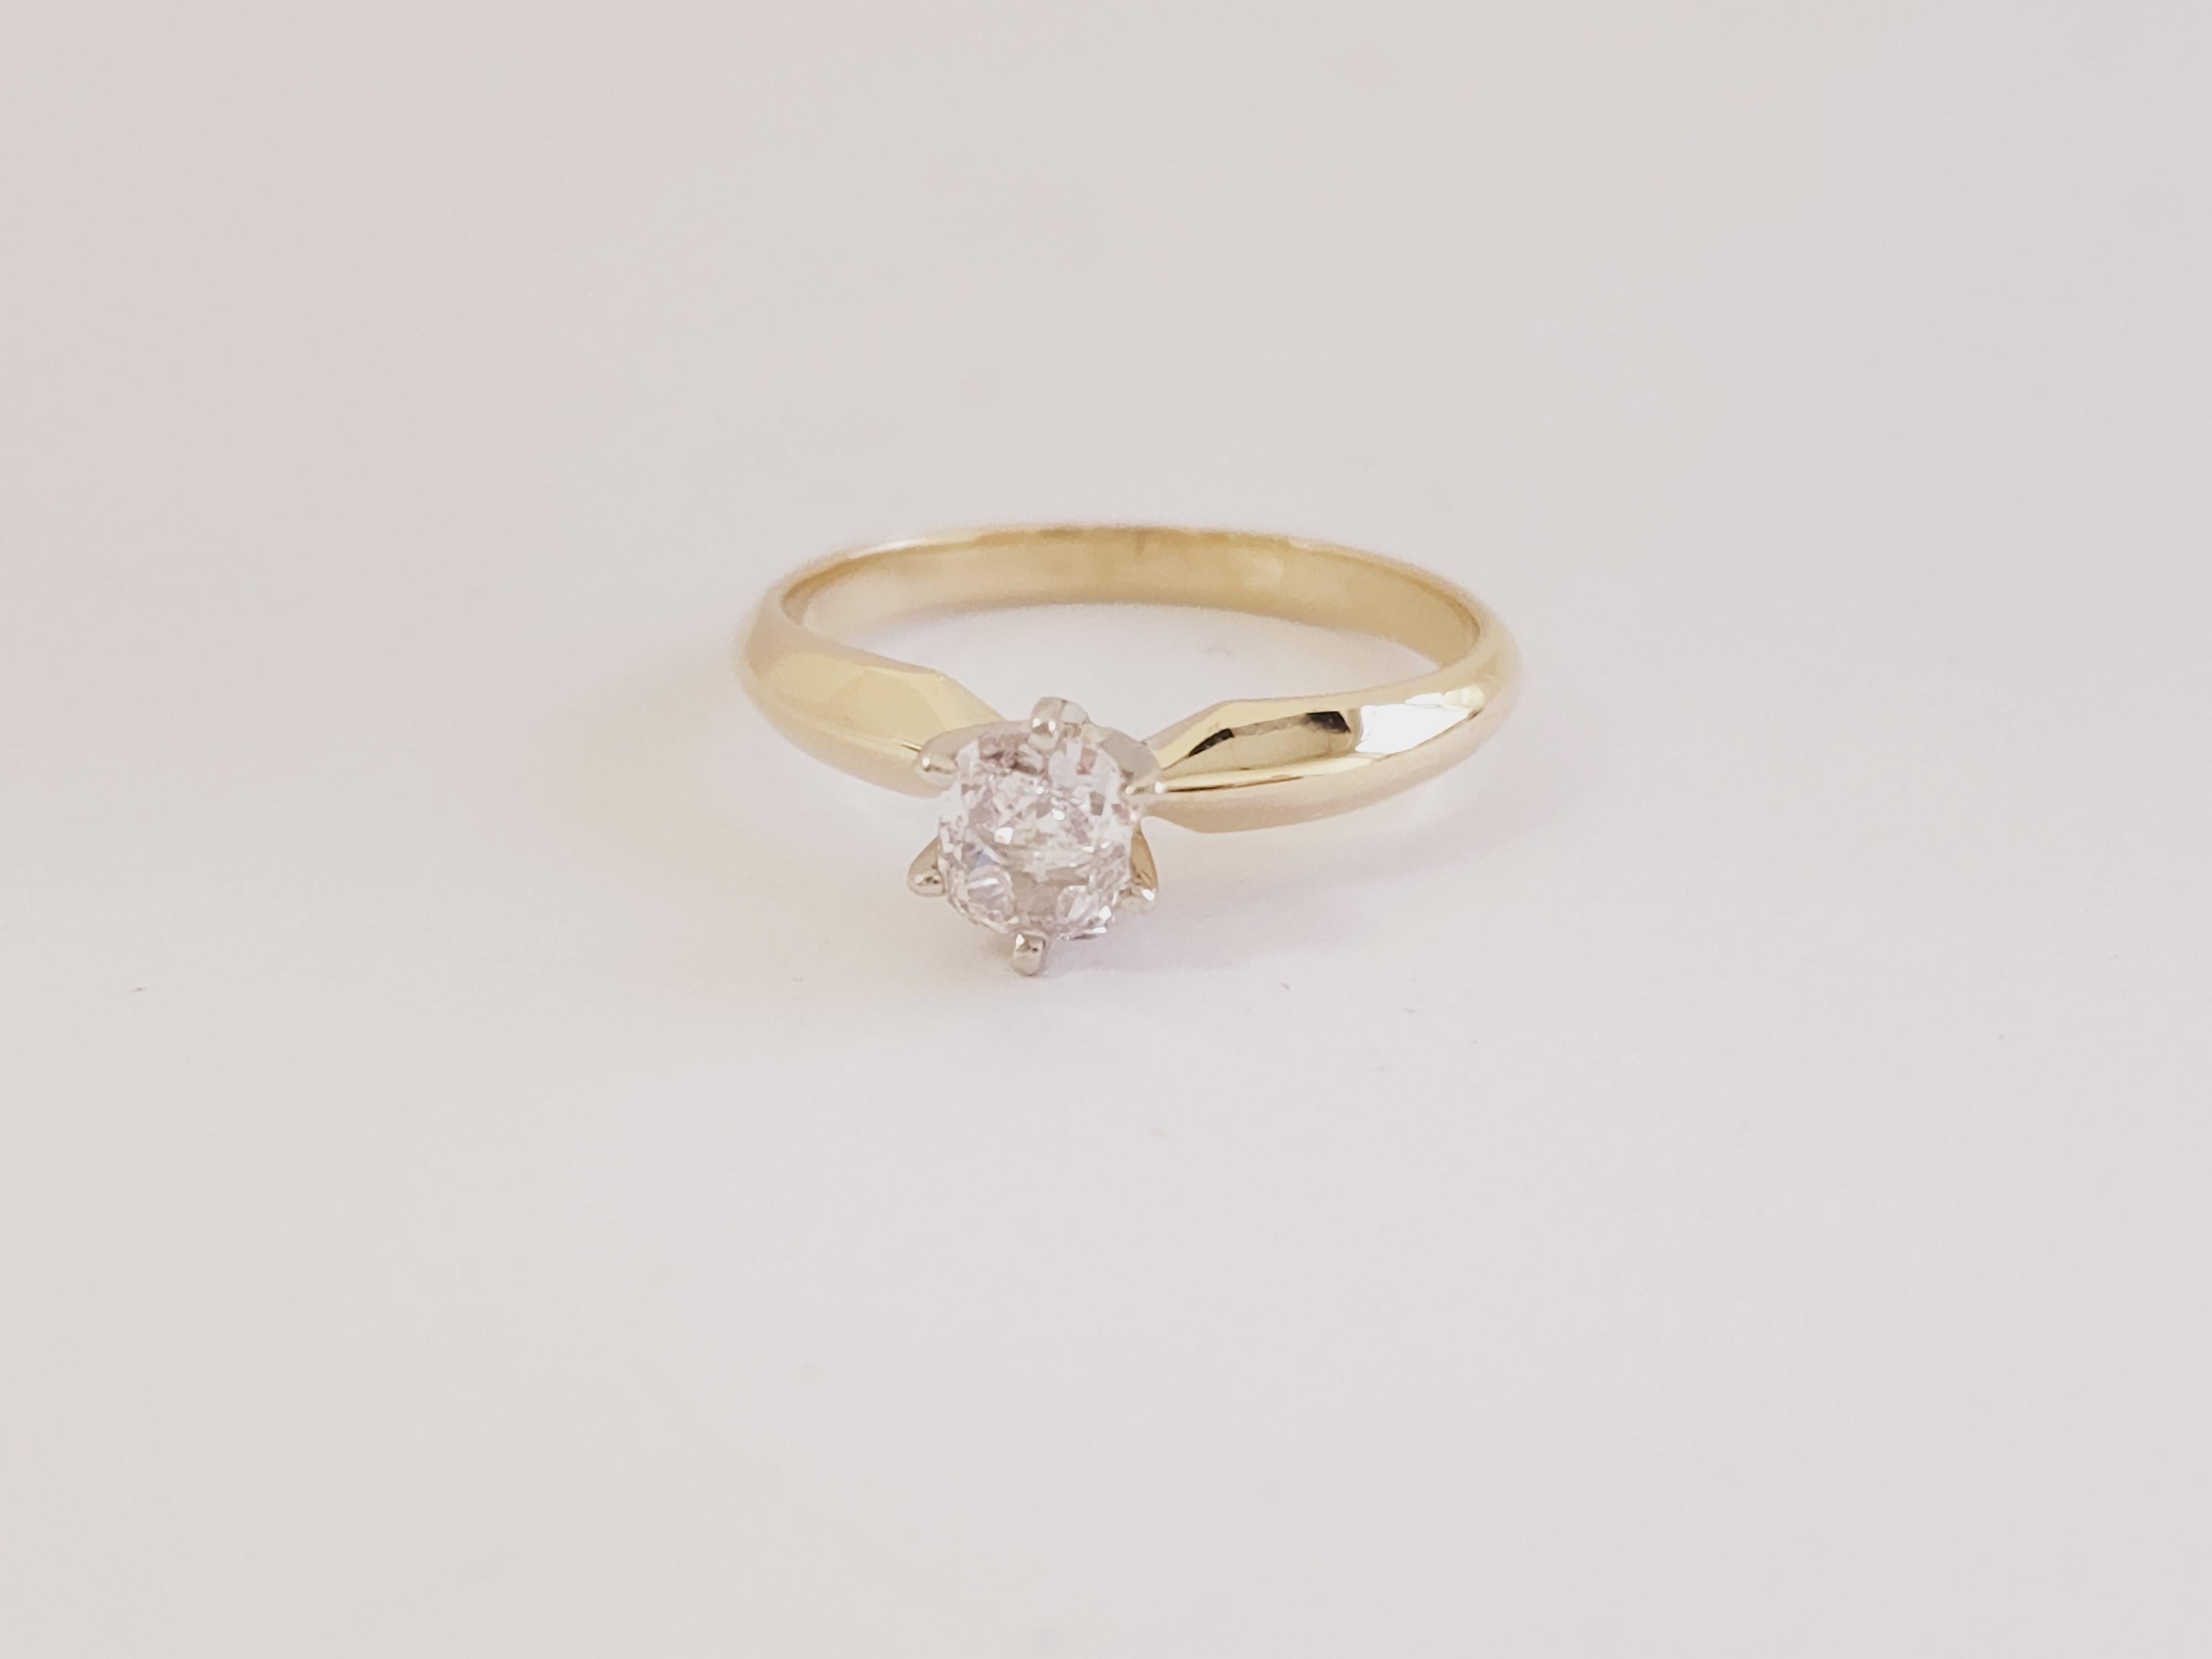 Cushion Cut GIA 0.53 Carat Cushion Pink Diamond Solitaire Ring 14K Yellow Gold For Sale